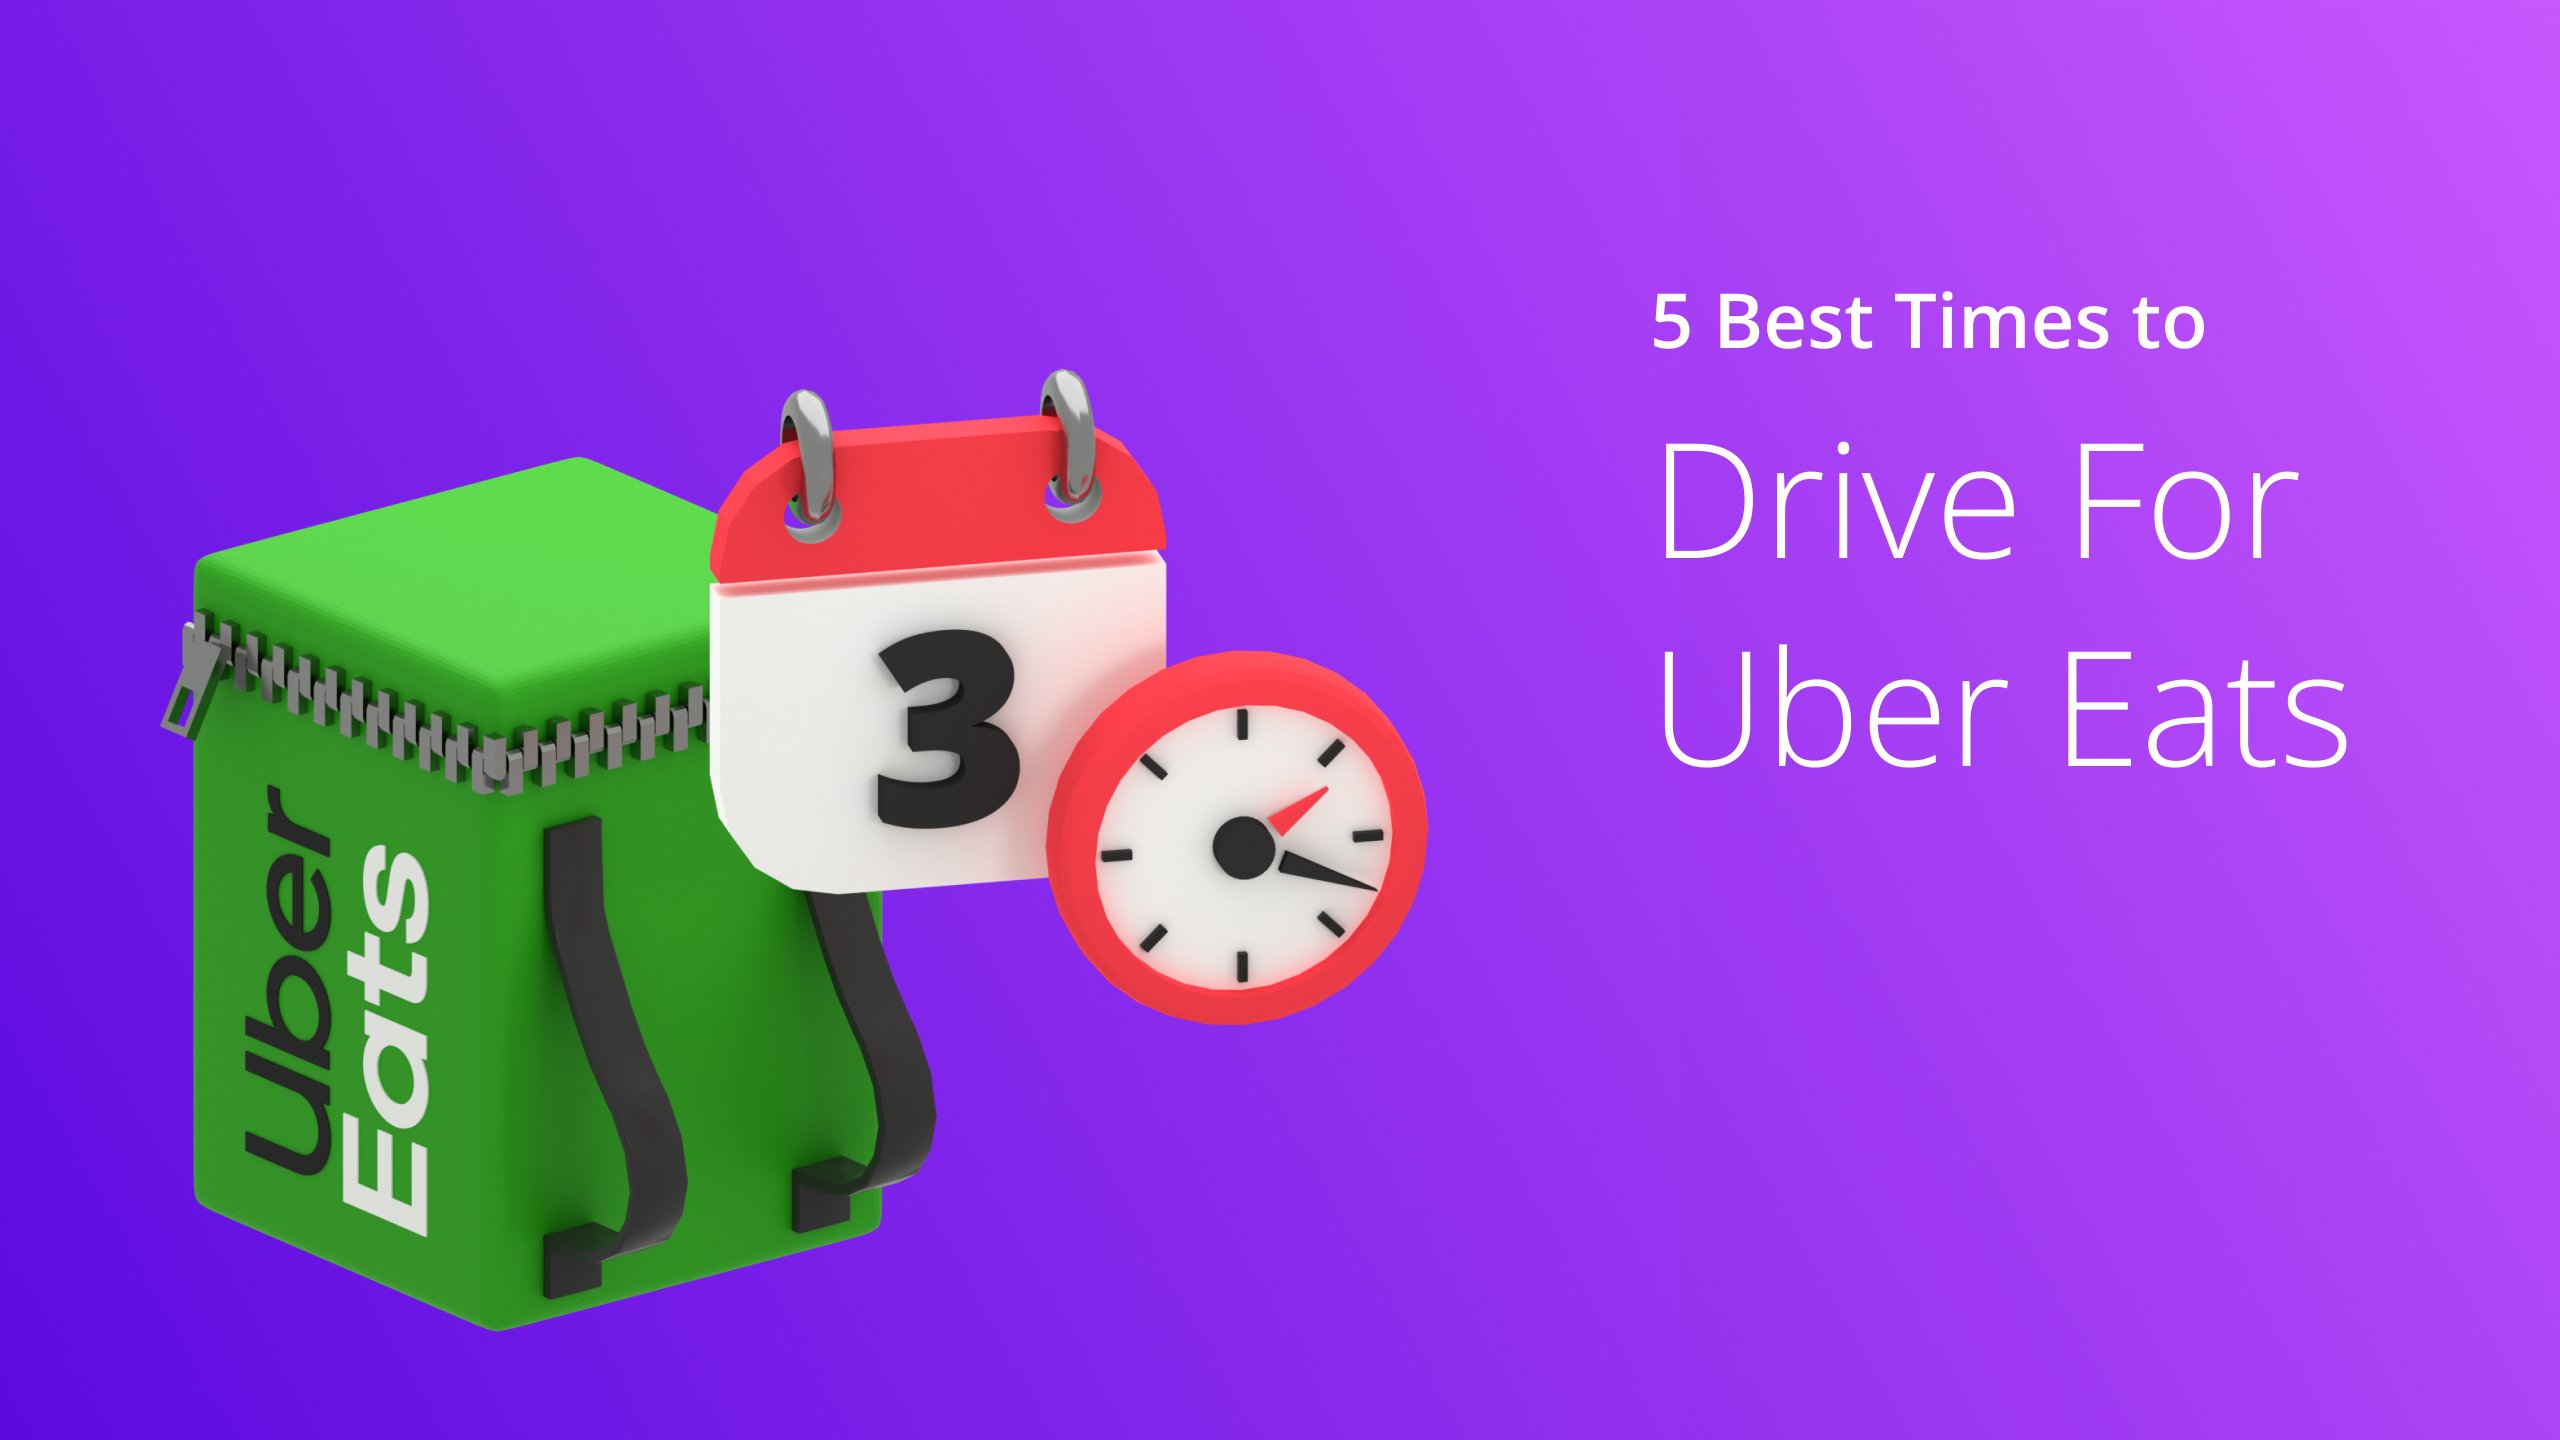 How to Deliver With Uber Eats, Driver App